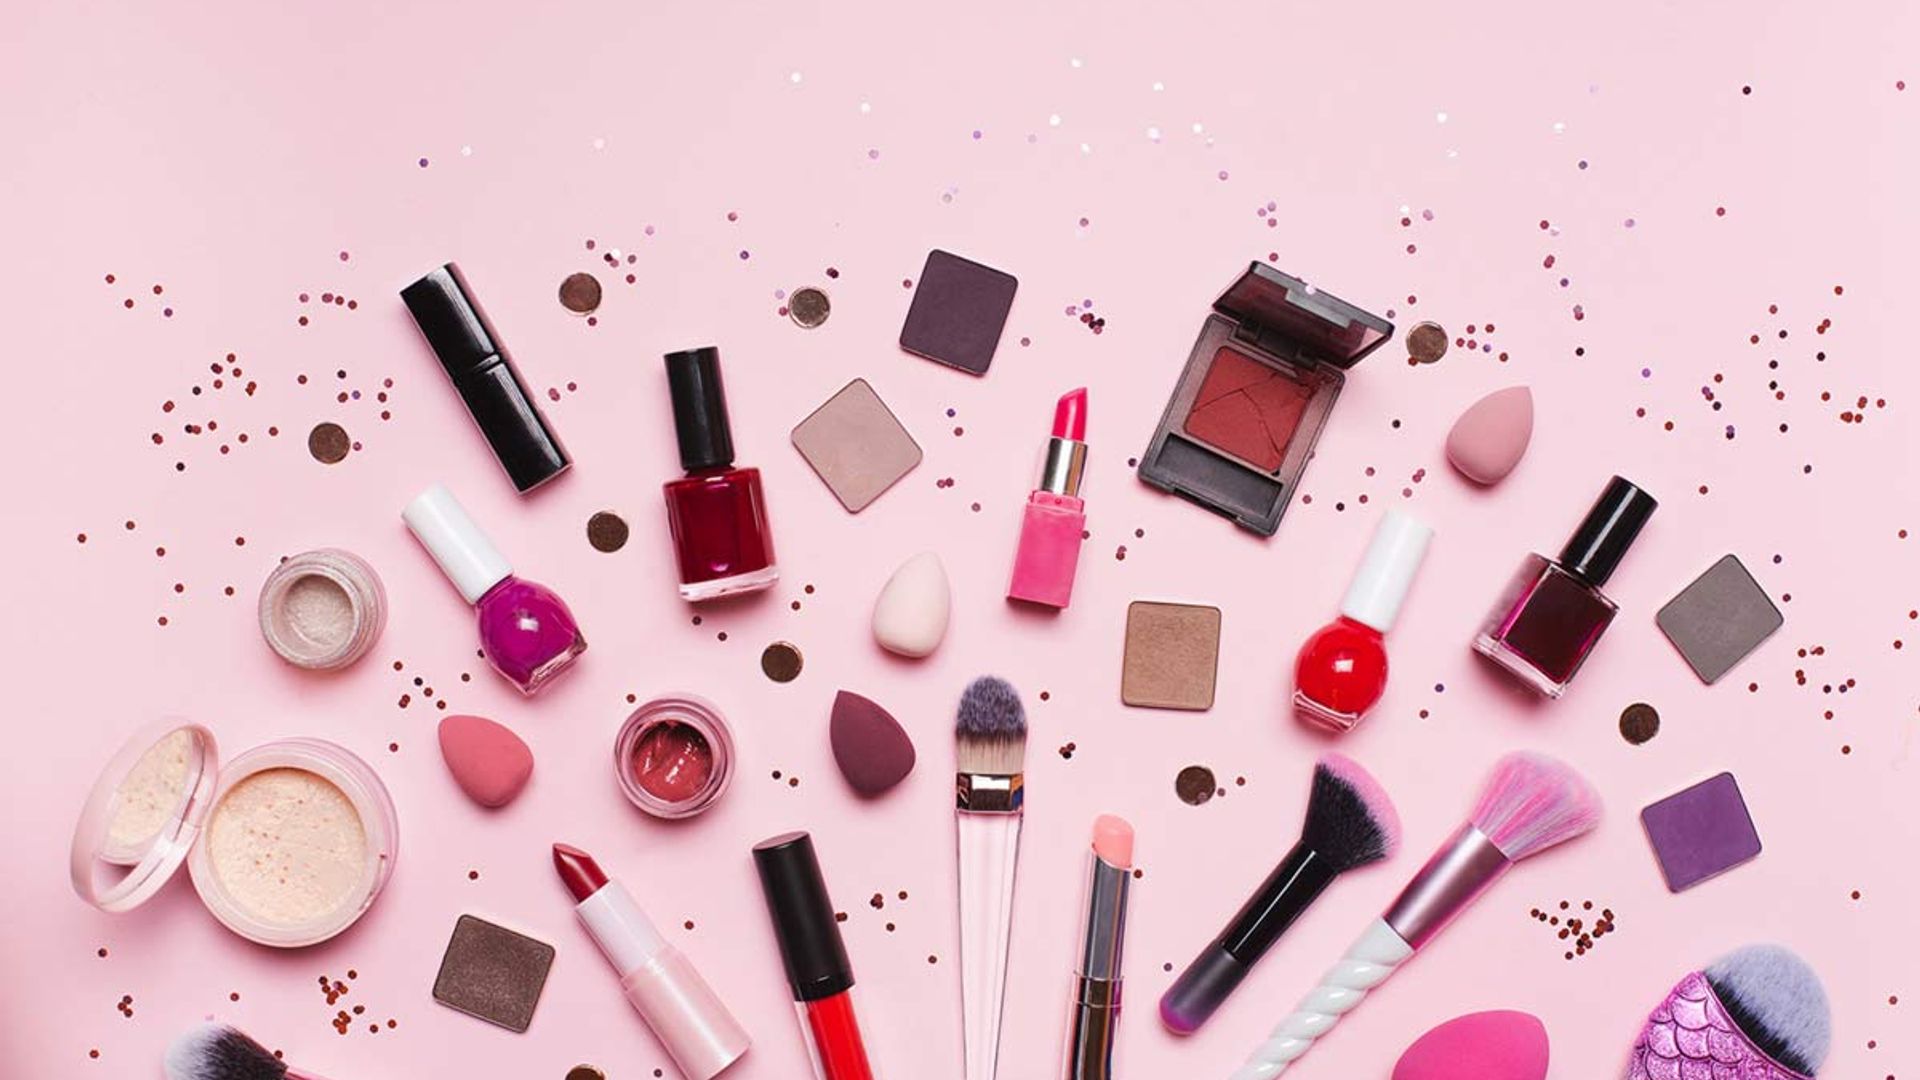 11 best makeup organisers 2022: how to store your cosmetics the right way